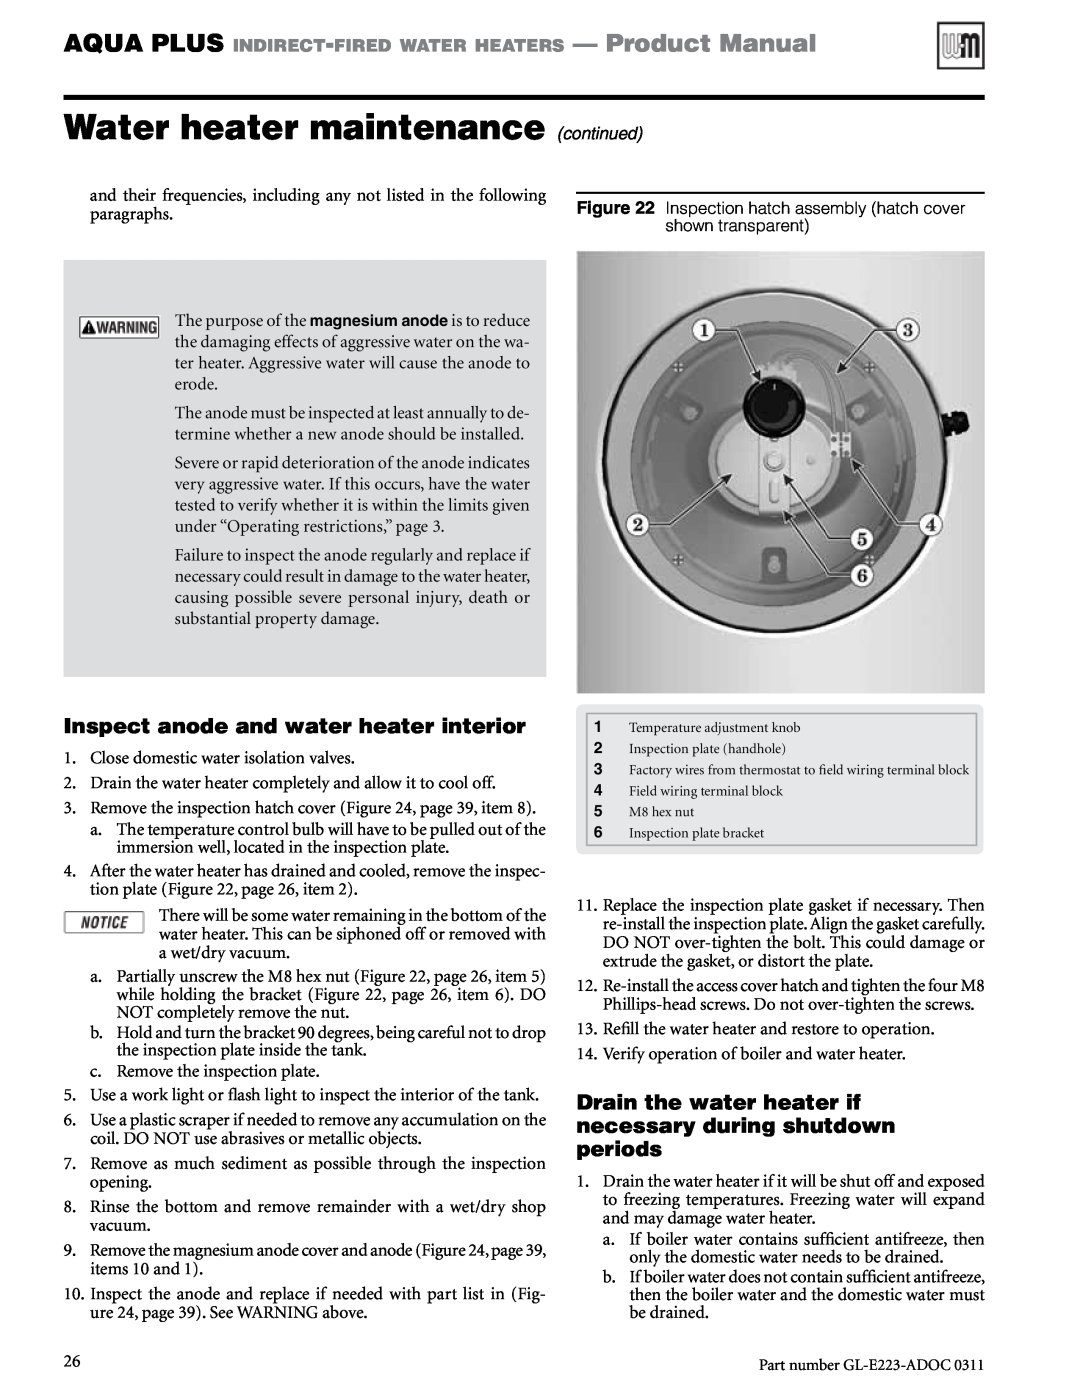 Weil-McLain GL-E223-ADOC 0311 manual Inspect anode and water heater interior, Water heater maintenance, continued 